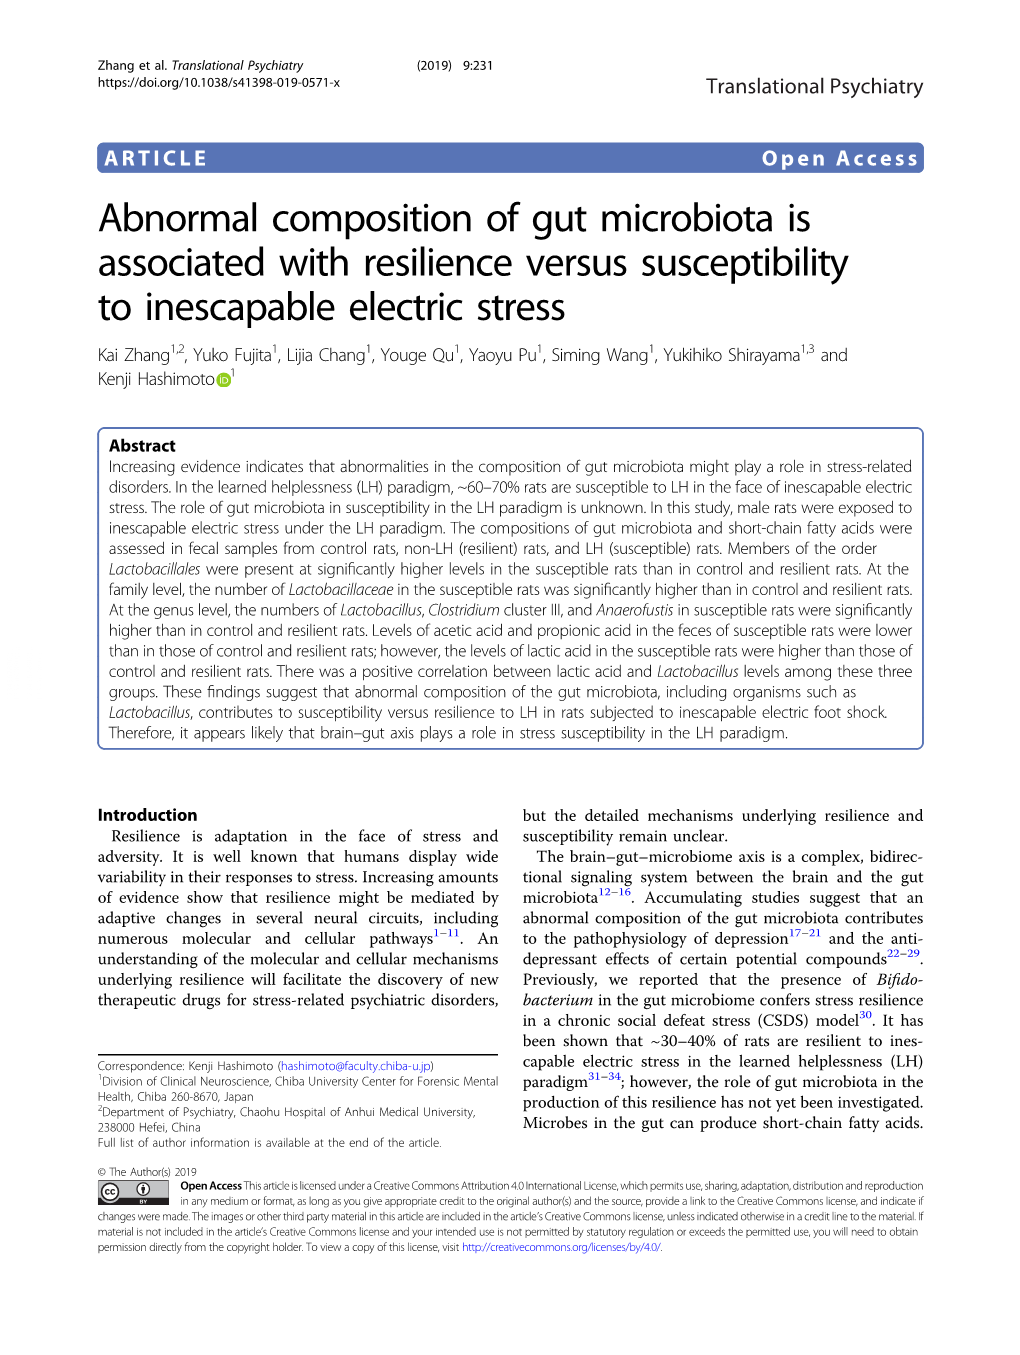 Abnormal Composition of Gut Microbiota Is Associated